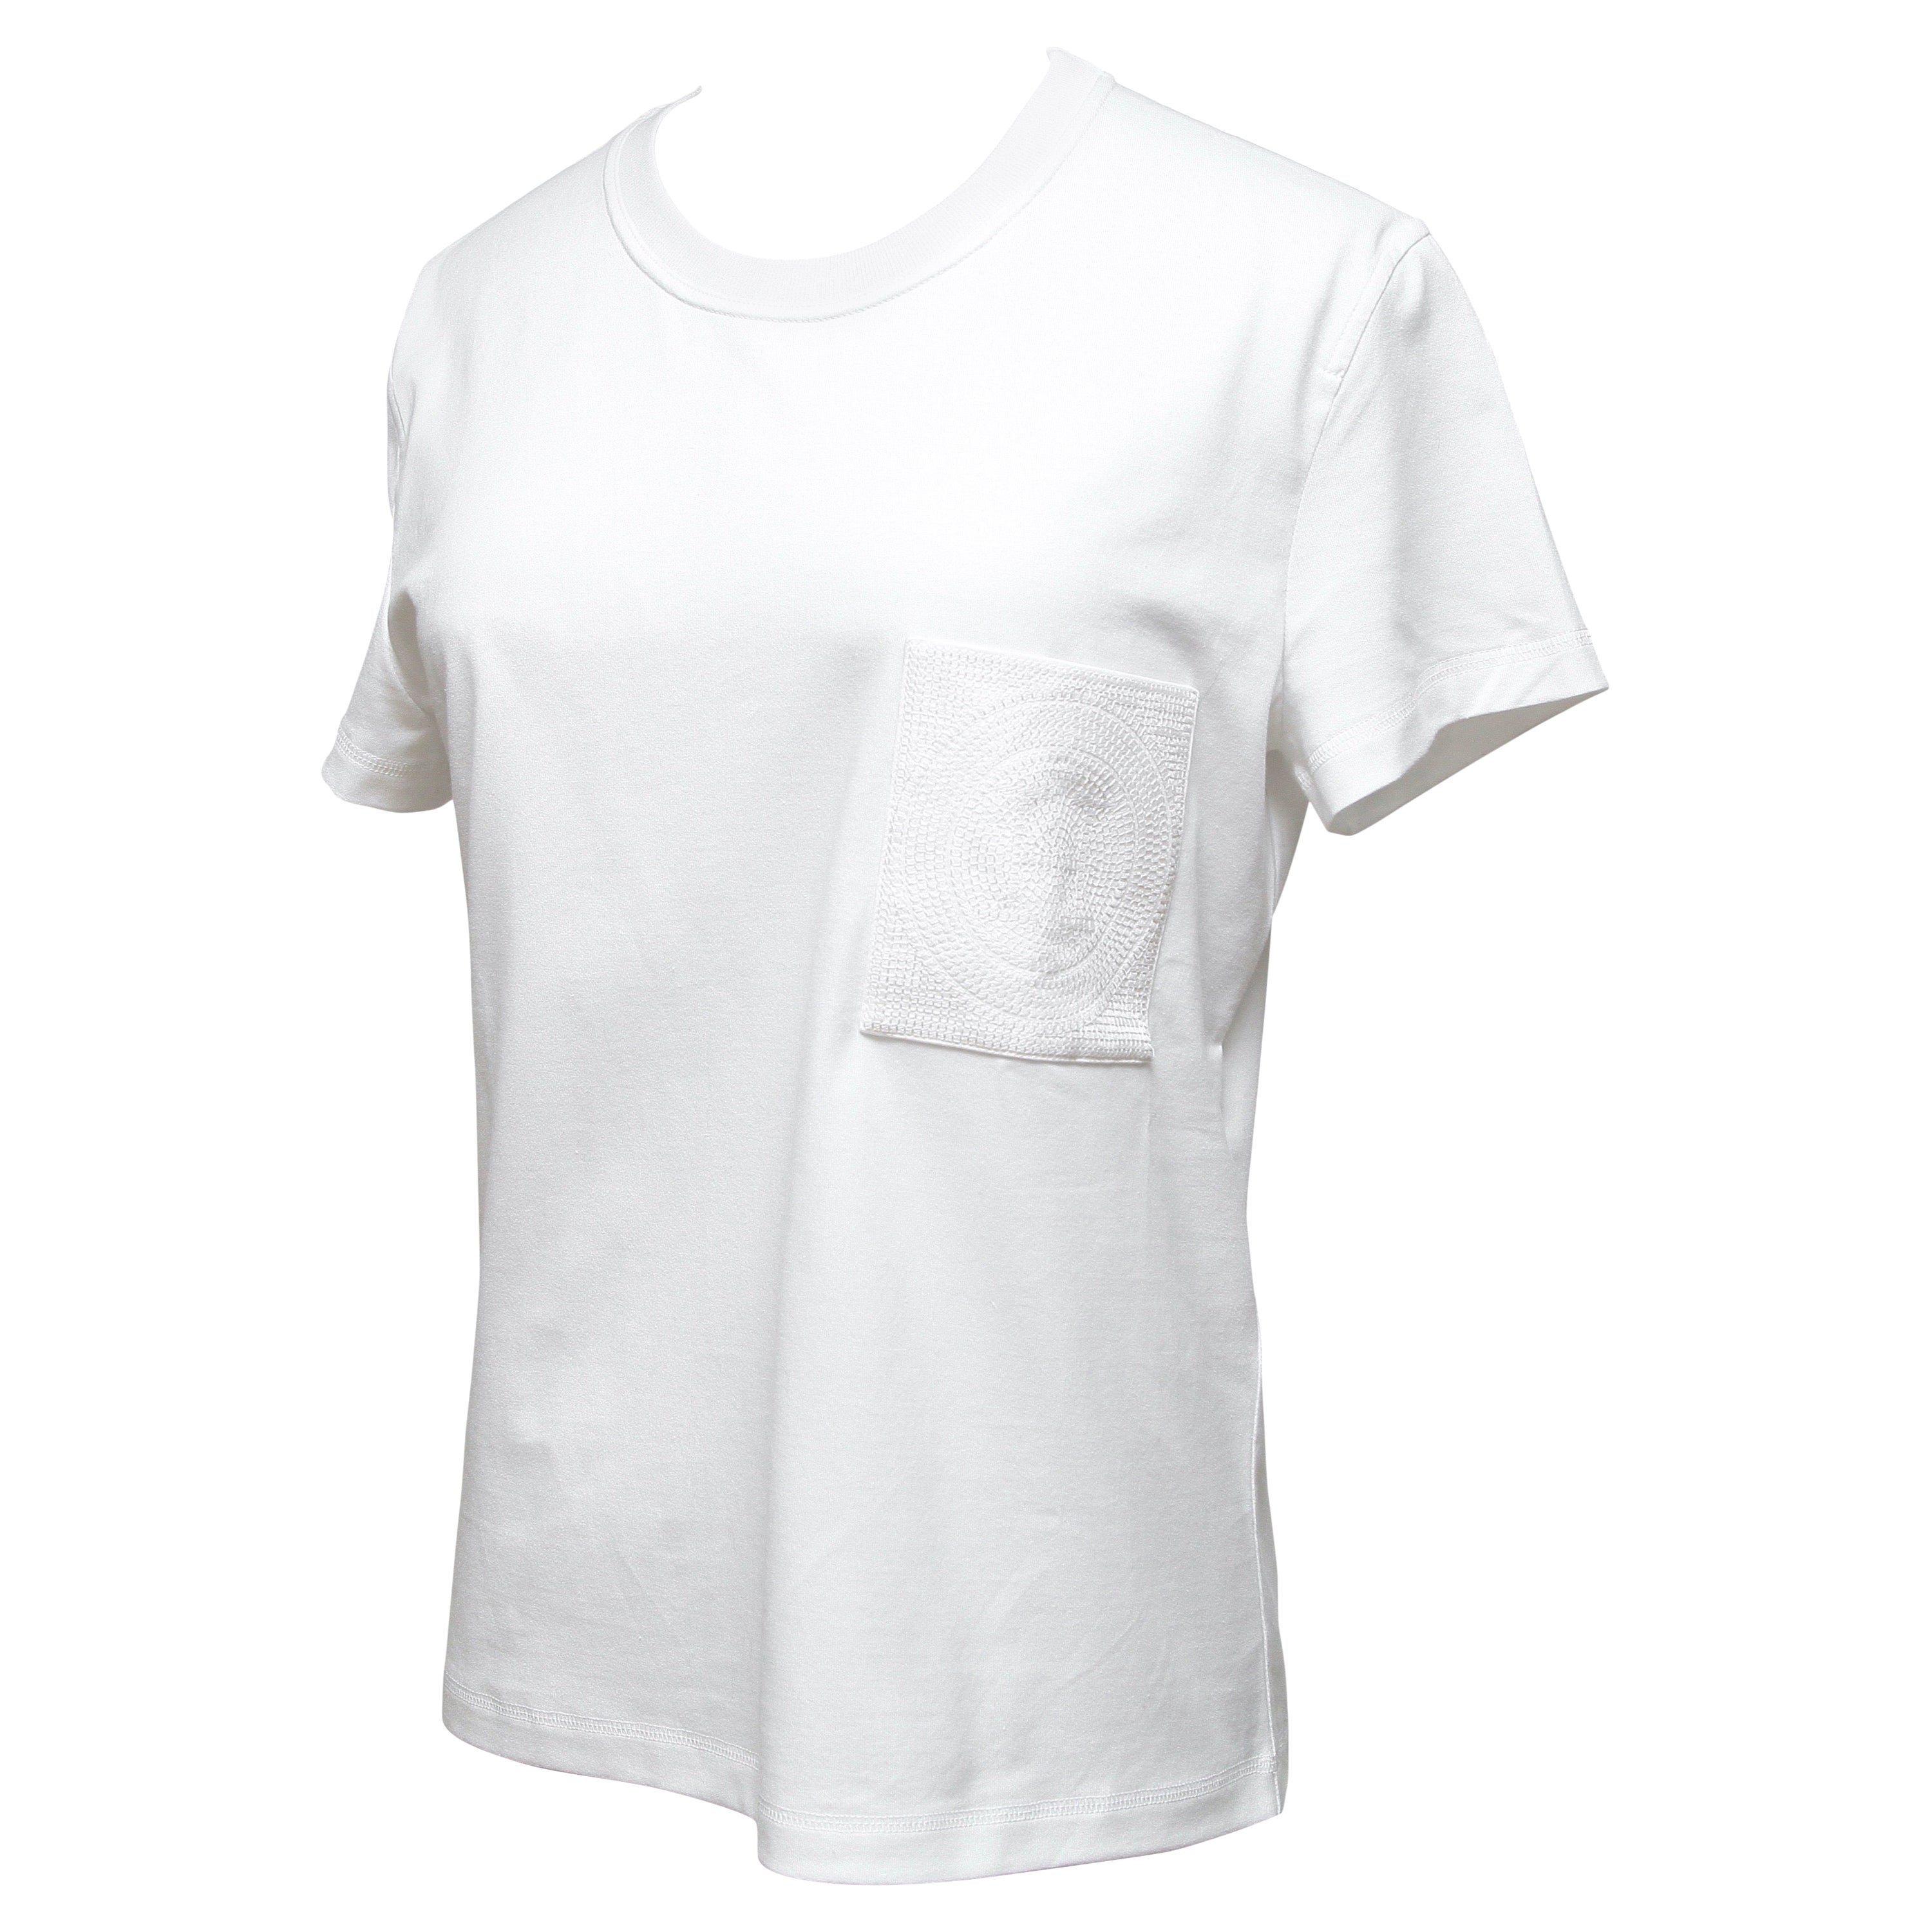 HERMES White T-Shirt Top Mosaique Embroidery Pocket Short Sleeve Crew Neck 36 For Sale